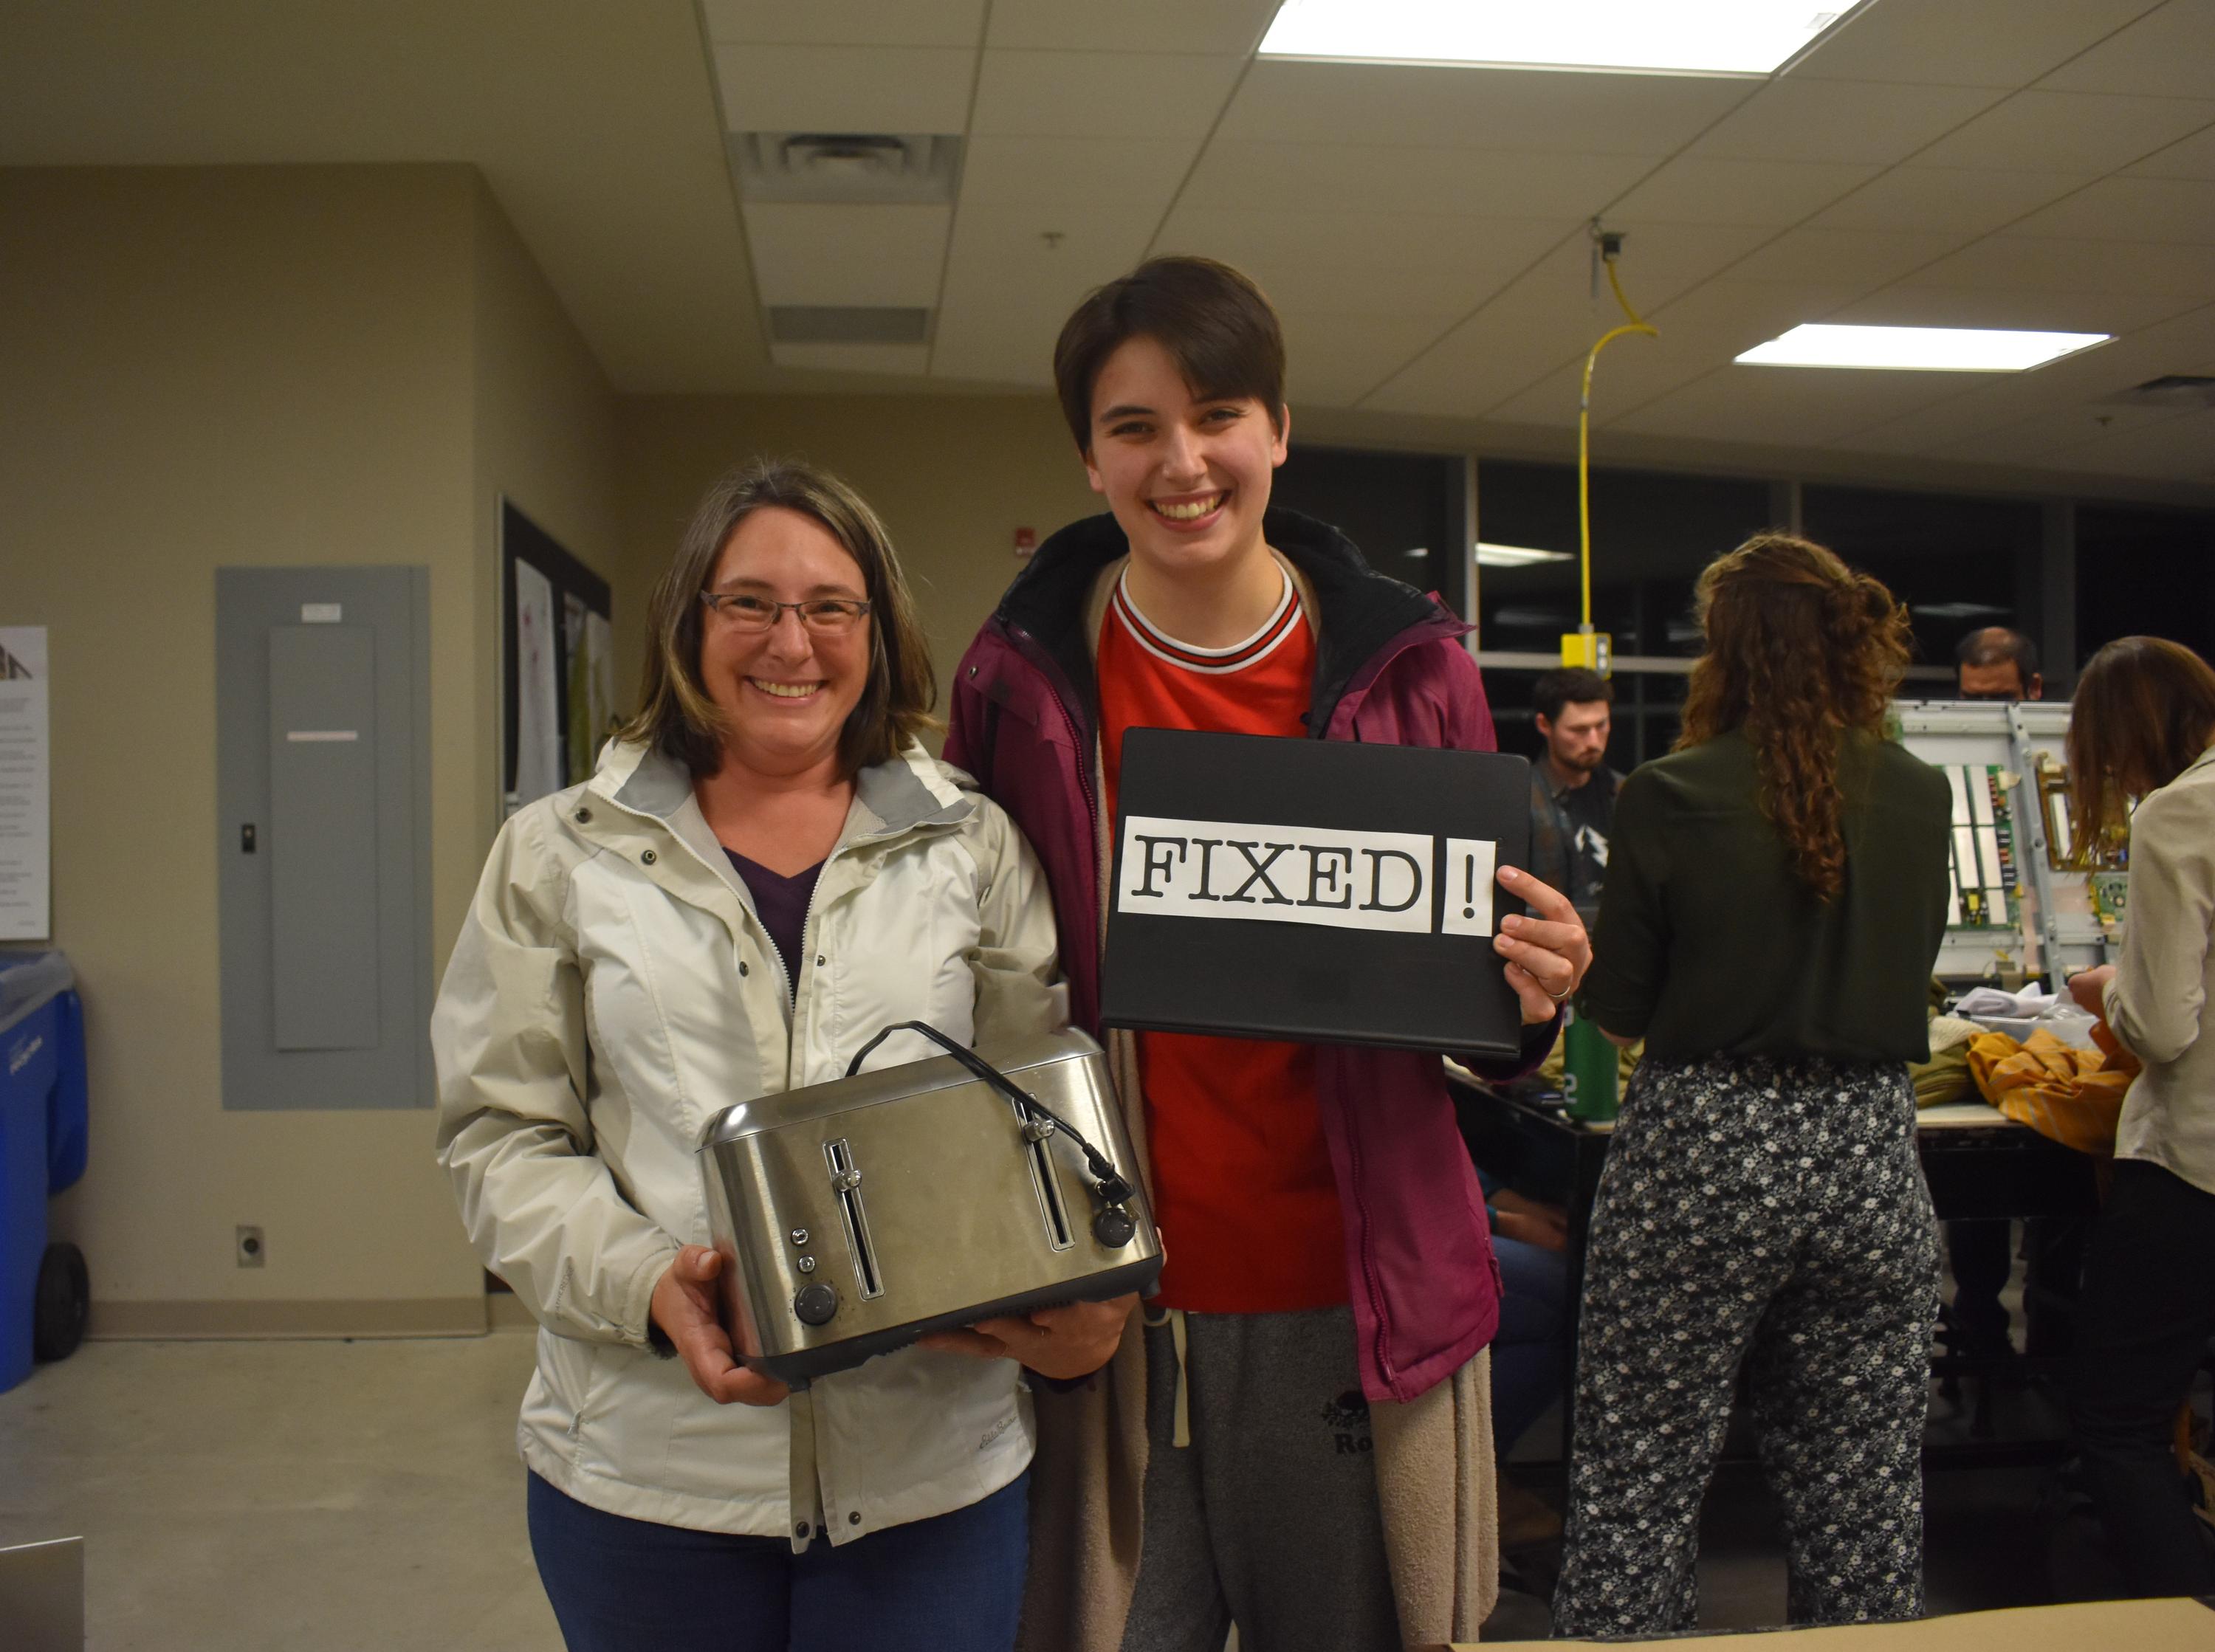 Mother and daughter posing with "FIXED" sign and fixed toaster